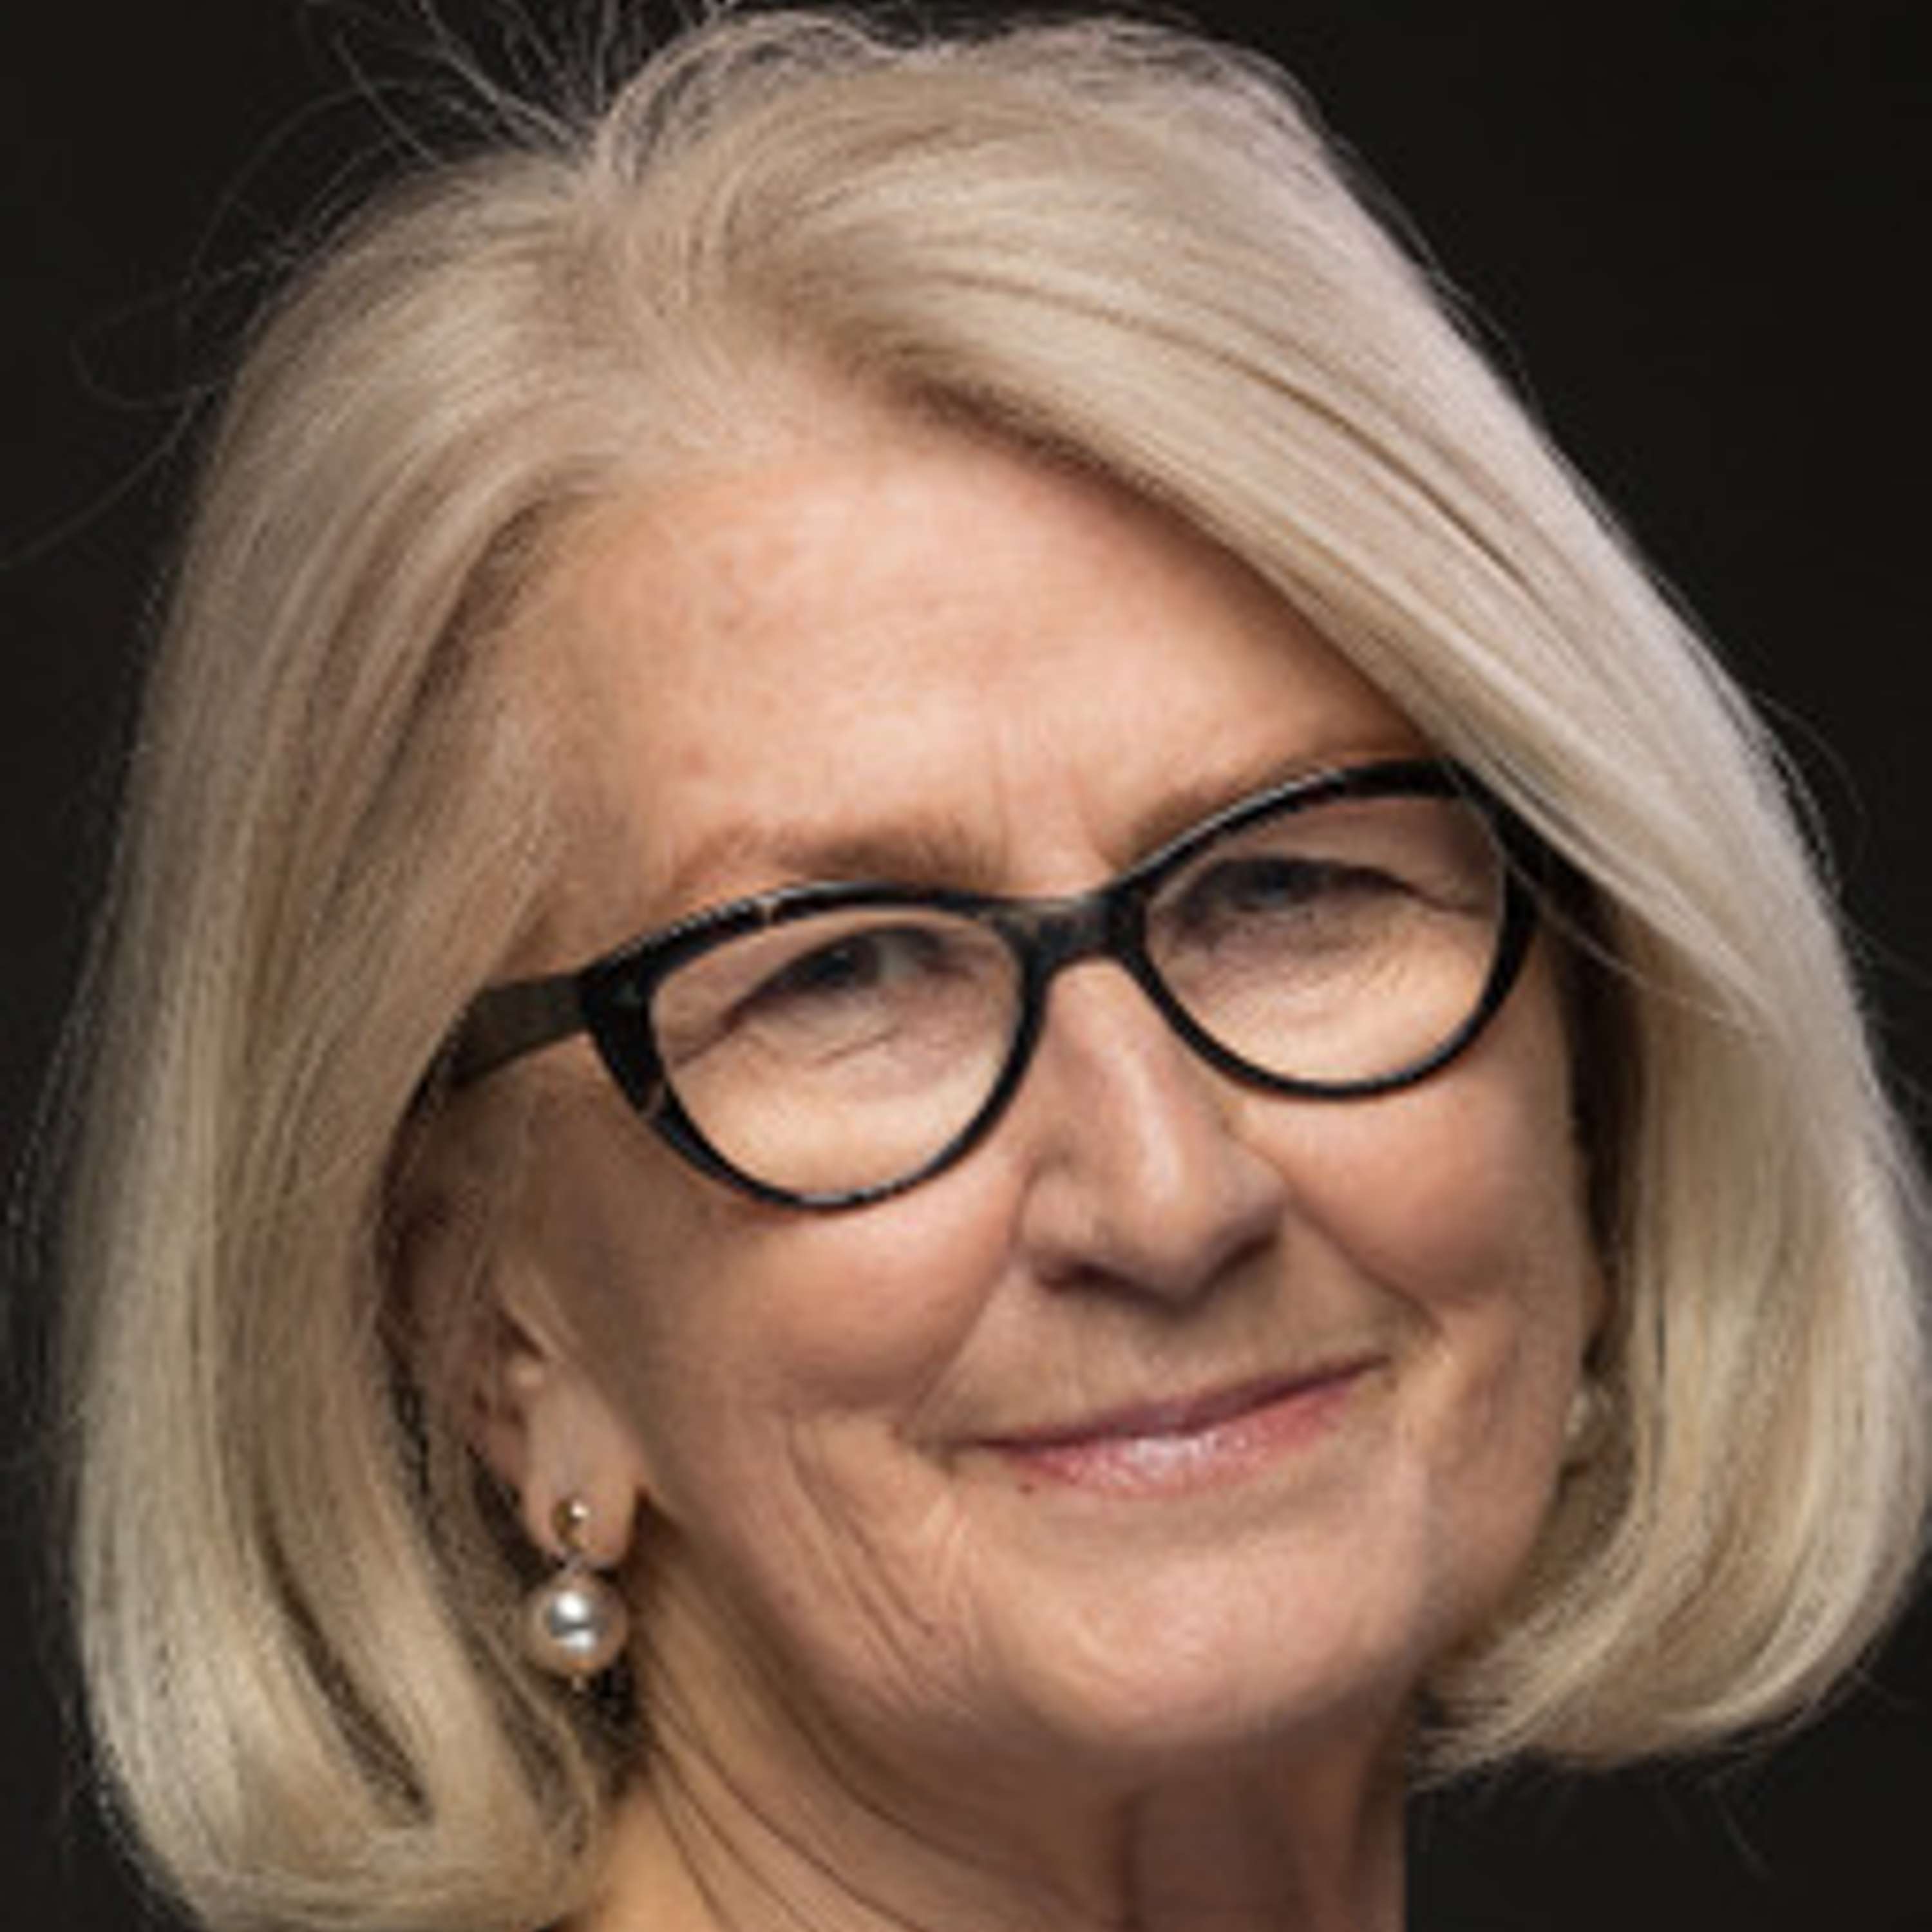 Episode 148: Interview with Ann Pettifor on finance and climate and stranded assets